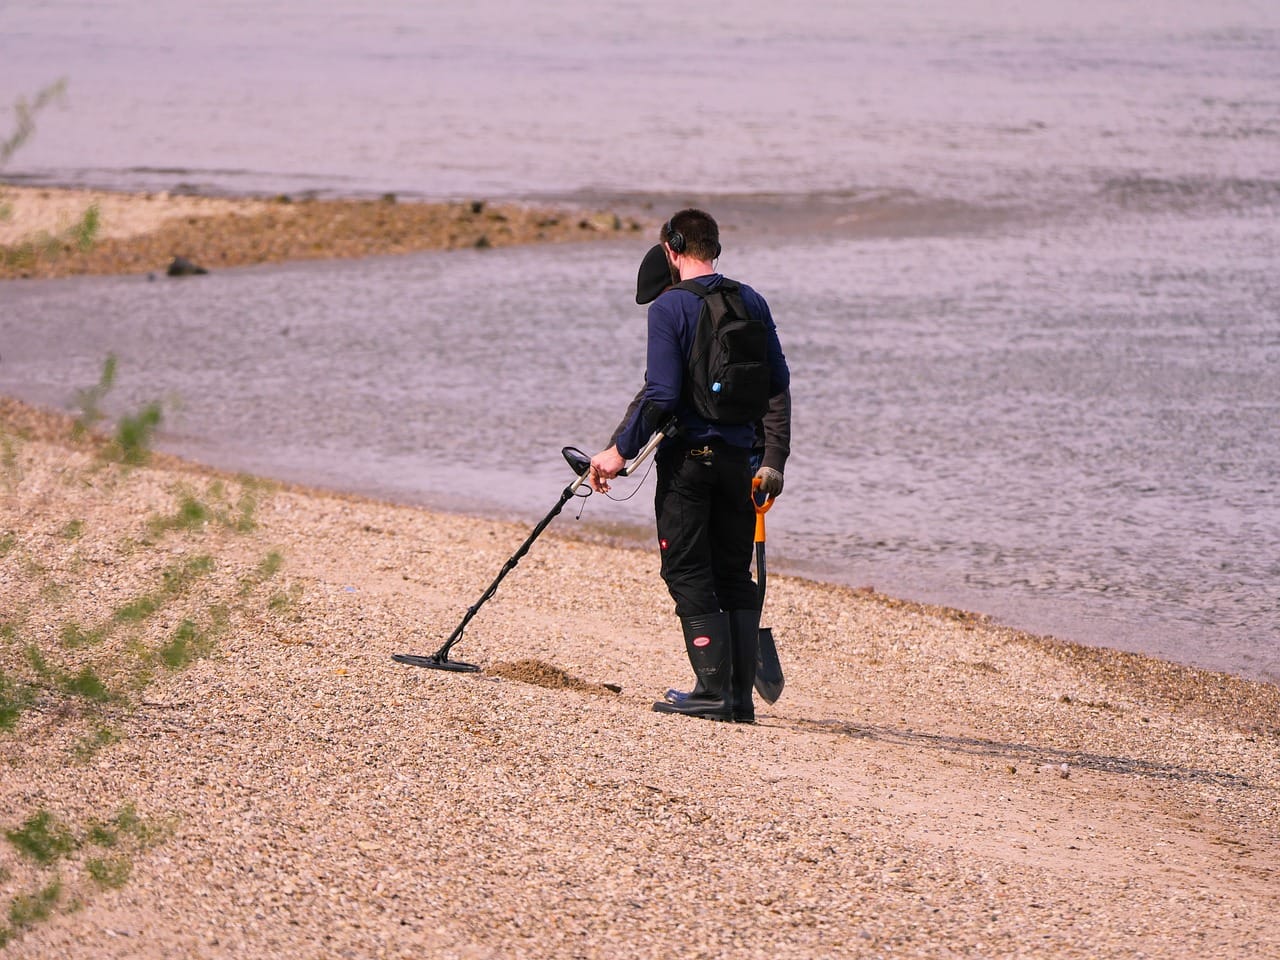 How Deep Can a Metal Detector Detect